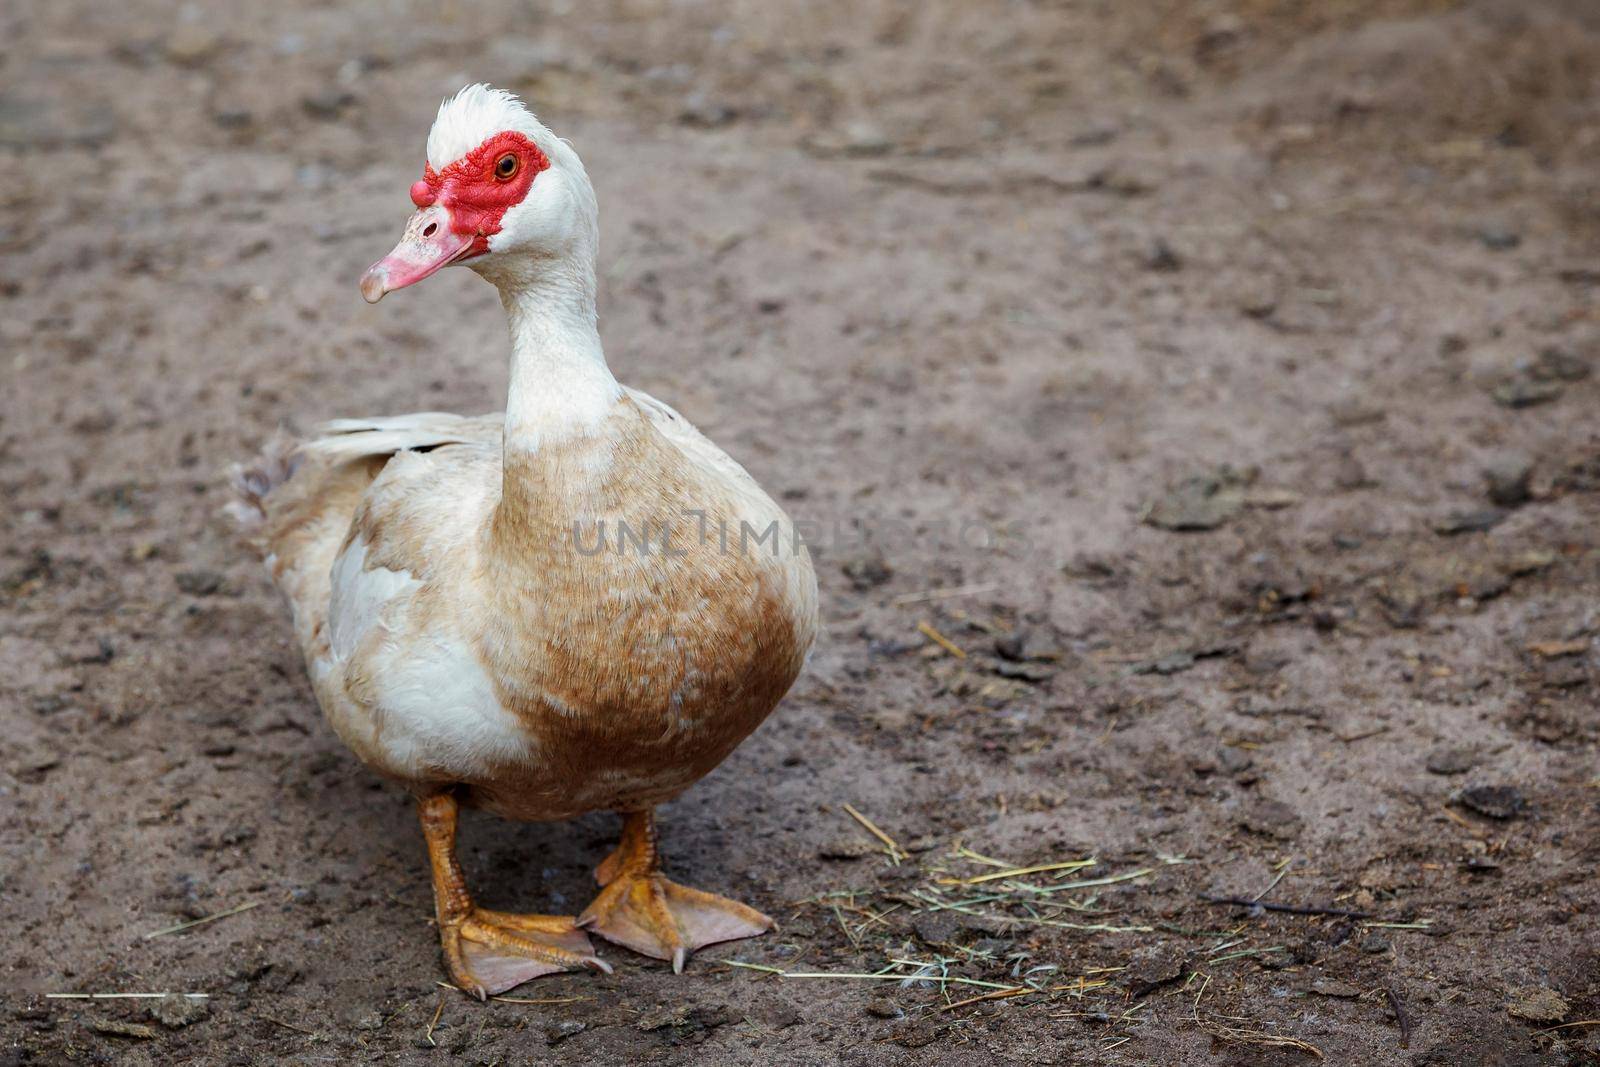 A brownish-white musky village duck poses against a brown ground background